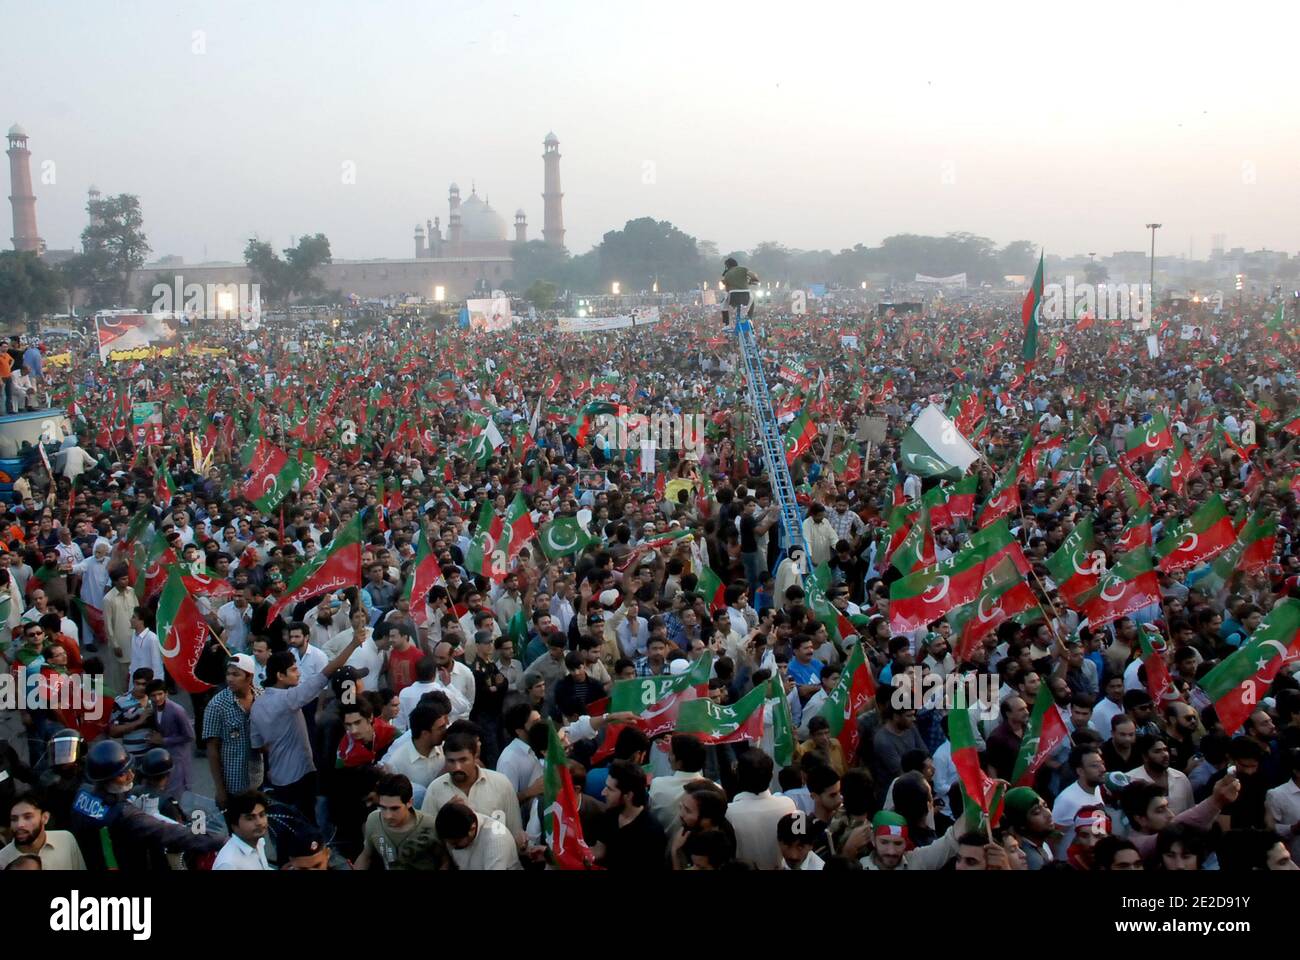 Supporters of Pakistani politician and former cricketer Imran Khan gathered for a rally in Lahore, Pakistan on October 30, 2011. A crowd of thousands gathered called by Khan to press President Asif Ali Zardari to step down. The rally, seen as a show of strength, comes two days after Sharif's brother Shahbaz, attracted some 30,000 people at an anti-Zardari protest also in the key political battleground of Lahore. Photo by Irfan/ABACAPRESS.COM Stock Photo